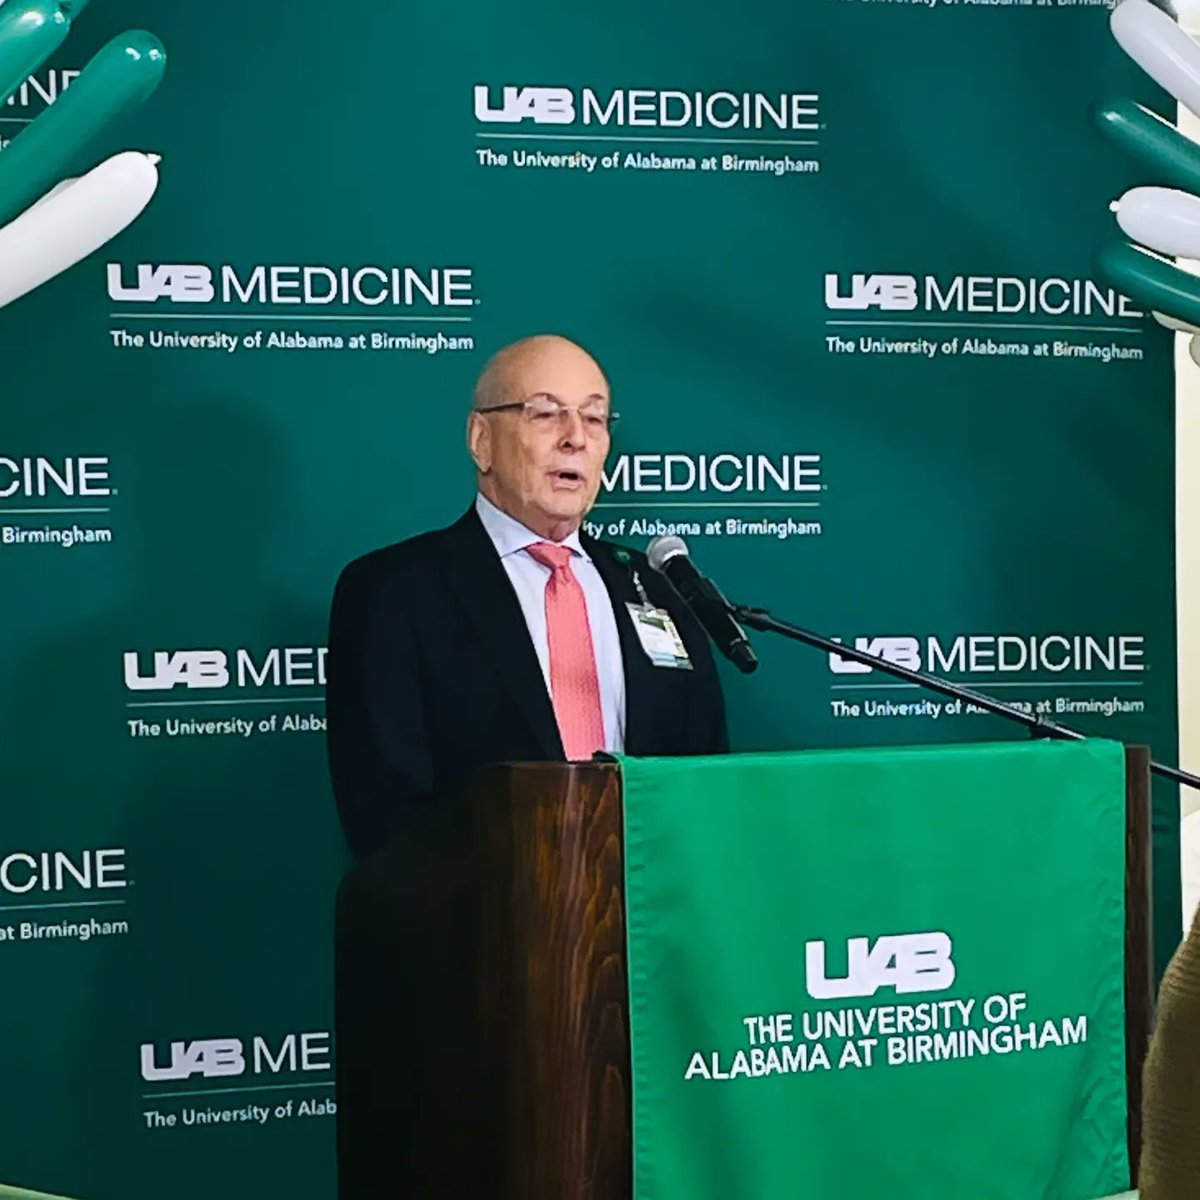 Today we celebrated the grand opening and ribbon cutting of the new Brain Aging and Memory Hub on the 5th floor of Callahan Eye Hospital. We are thrilled to be able to accommodate patients in this new comprehensive space! @UABHeersink @uabmedicine